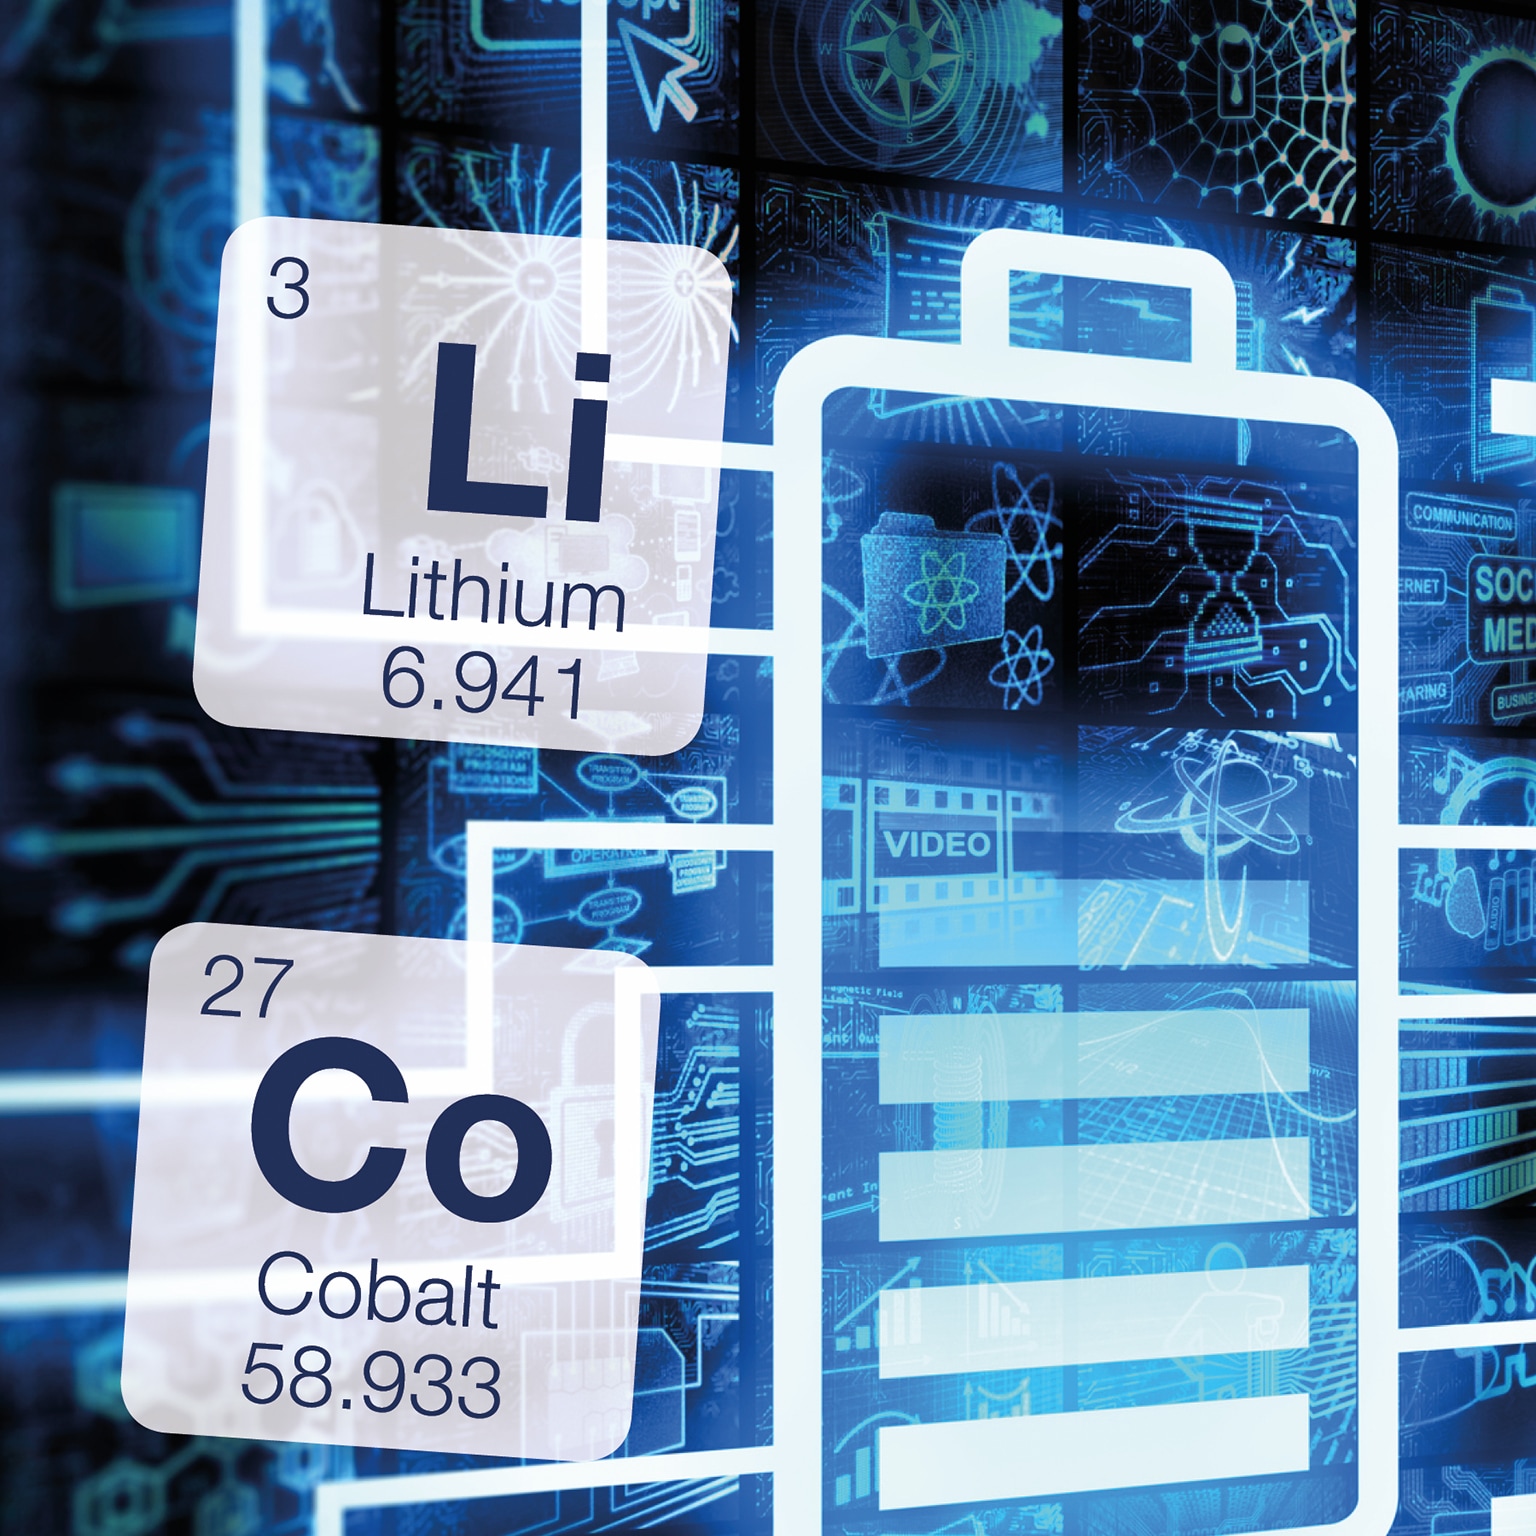 Lithium and cobalt: A tale of two commodities